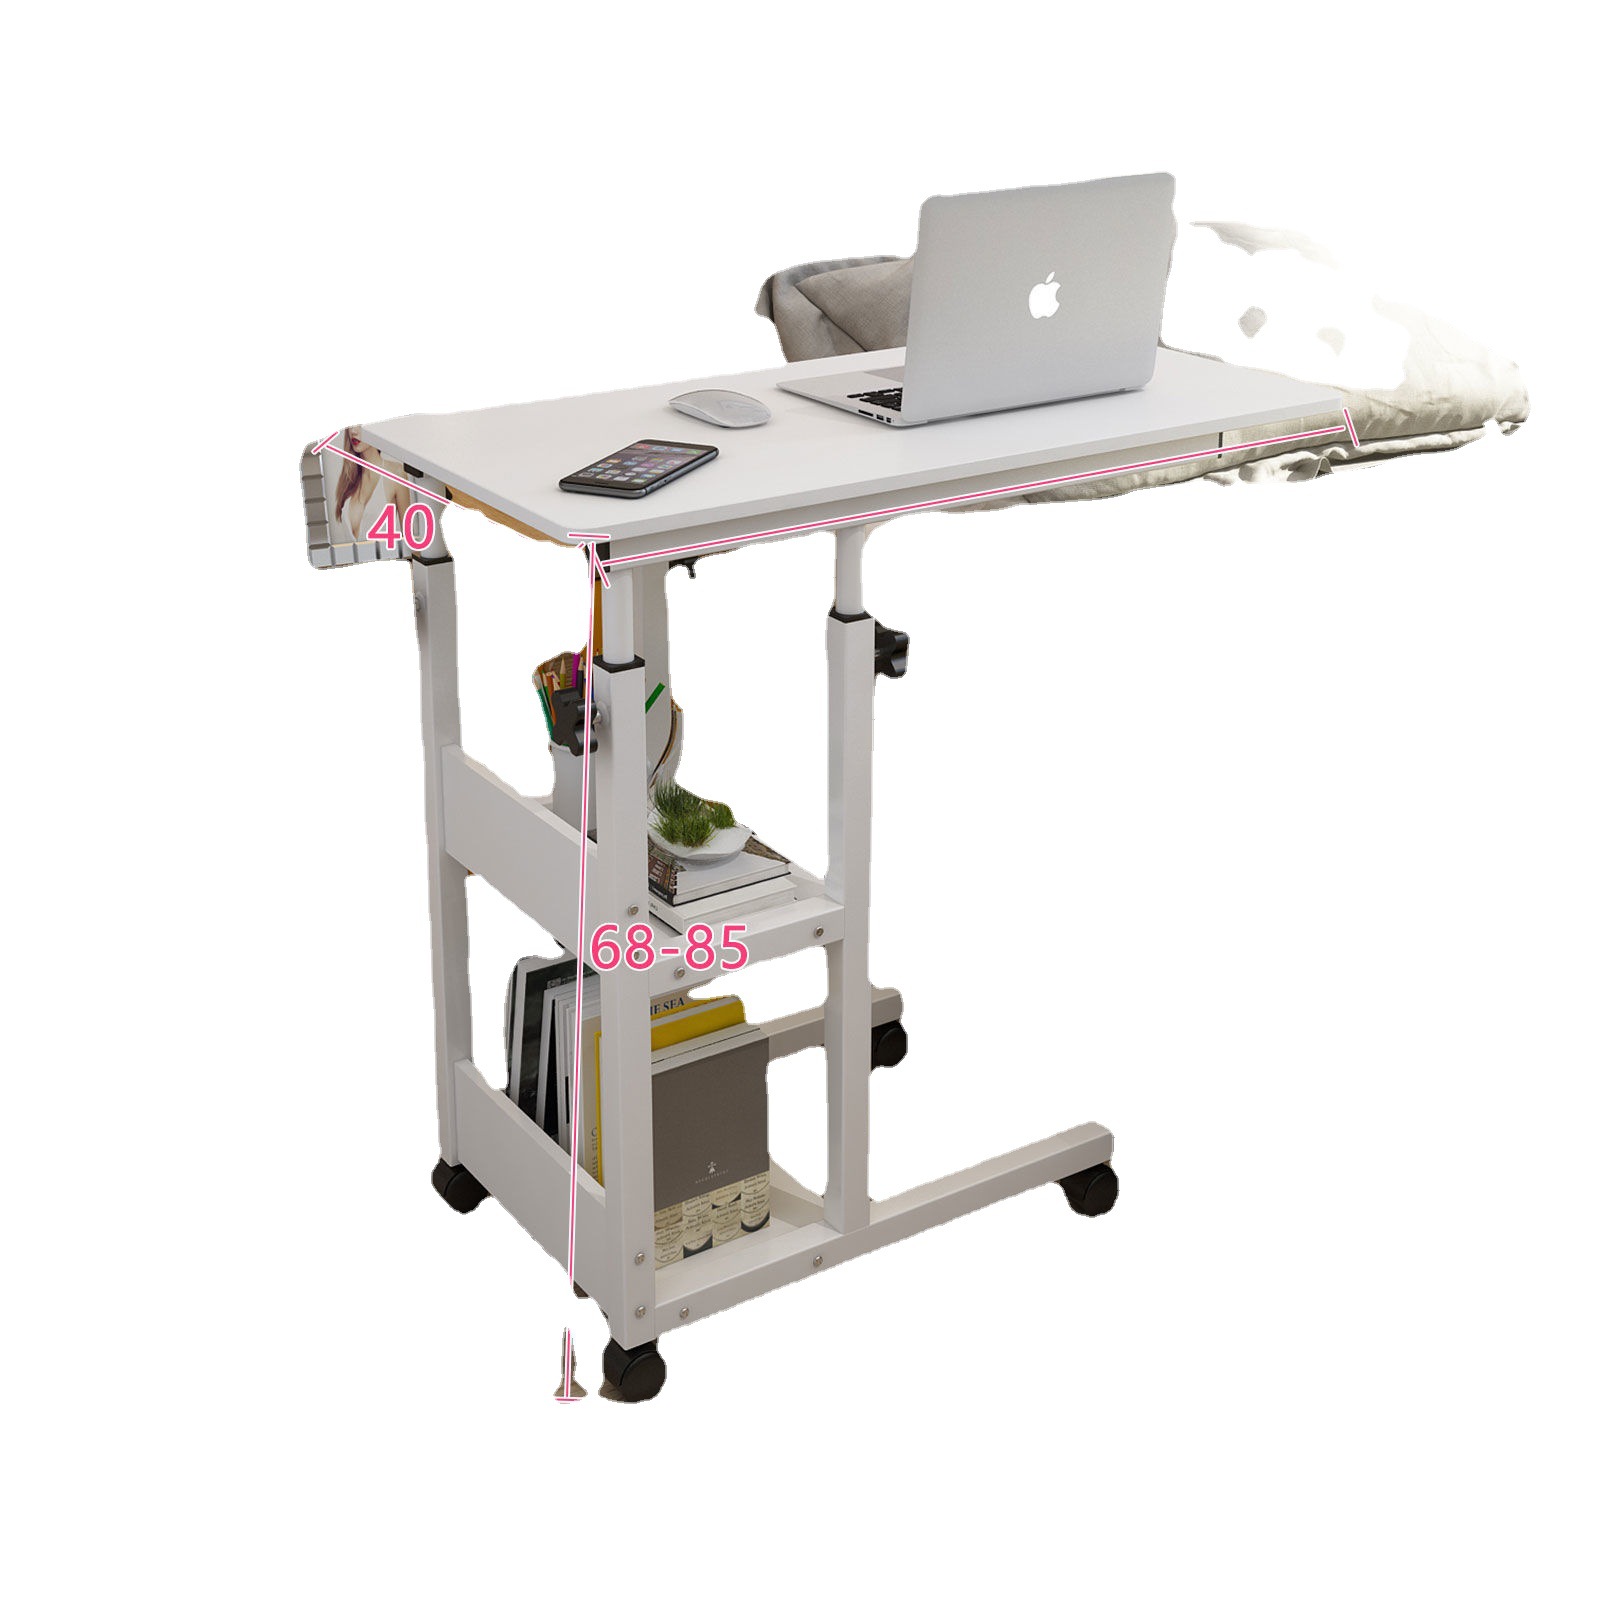 Lifting Movable Bedside Table Home Laptop Desk Bedroom Lazy Table Bed Desk Simple Small Table